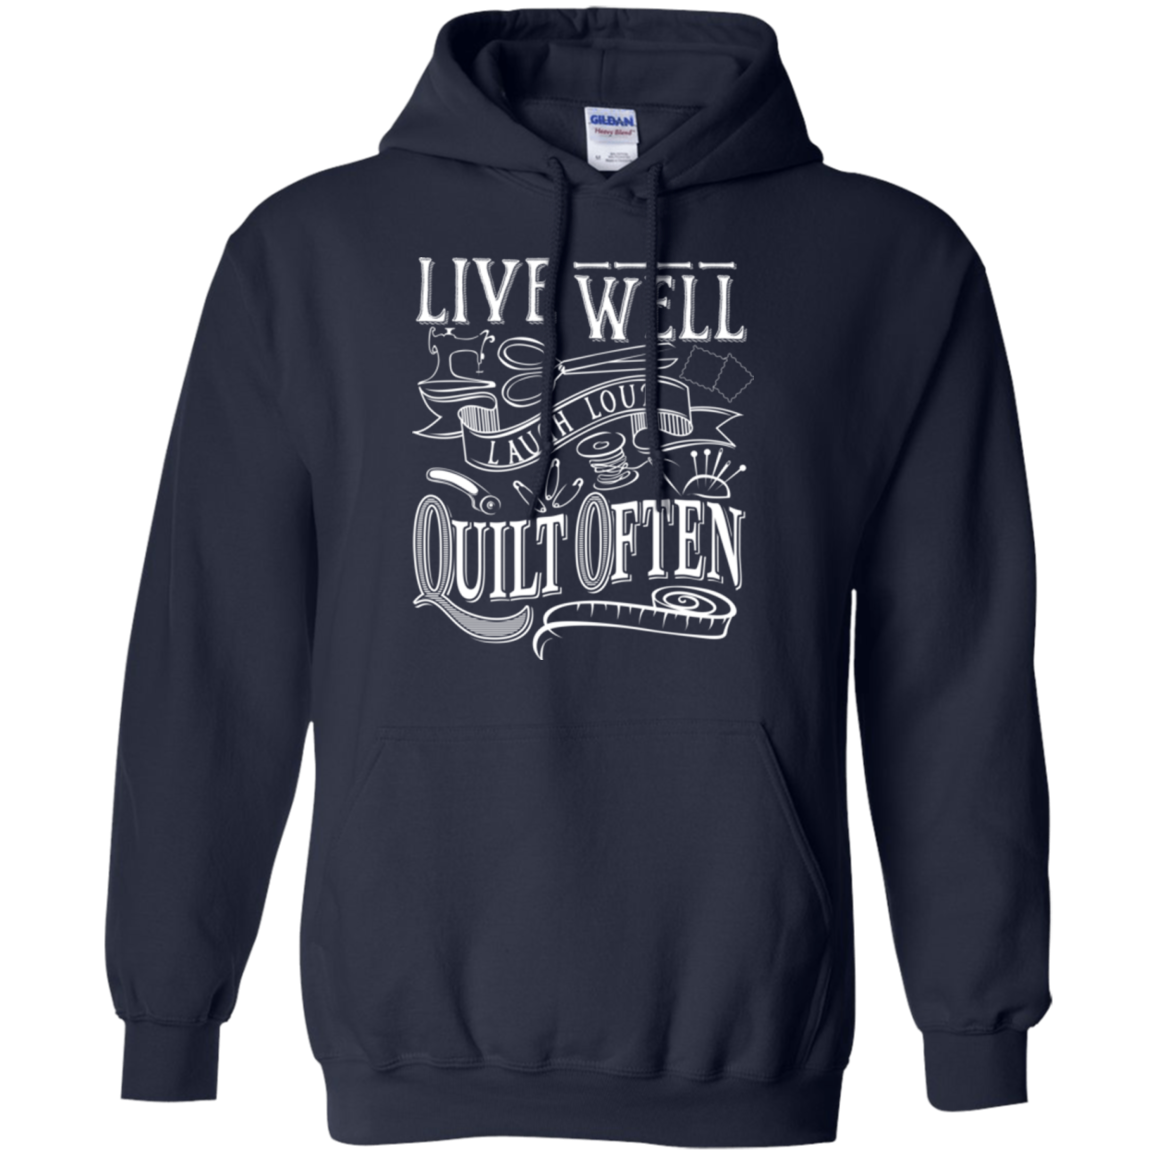 Live Well, Quilt Often Pullover Hoodie